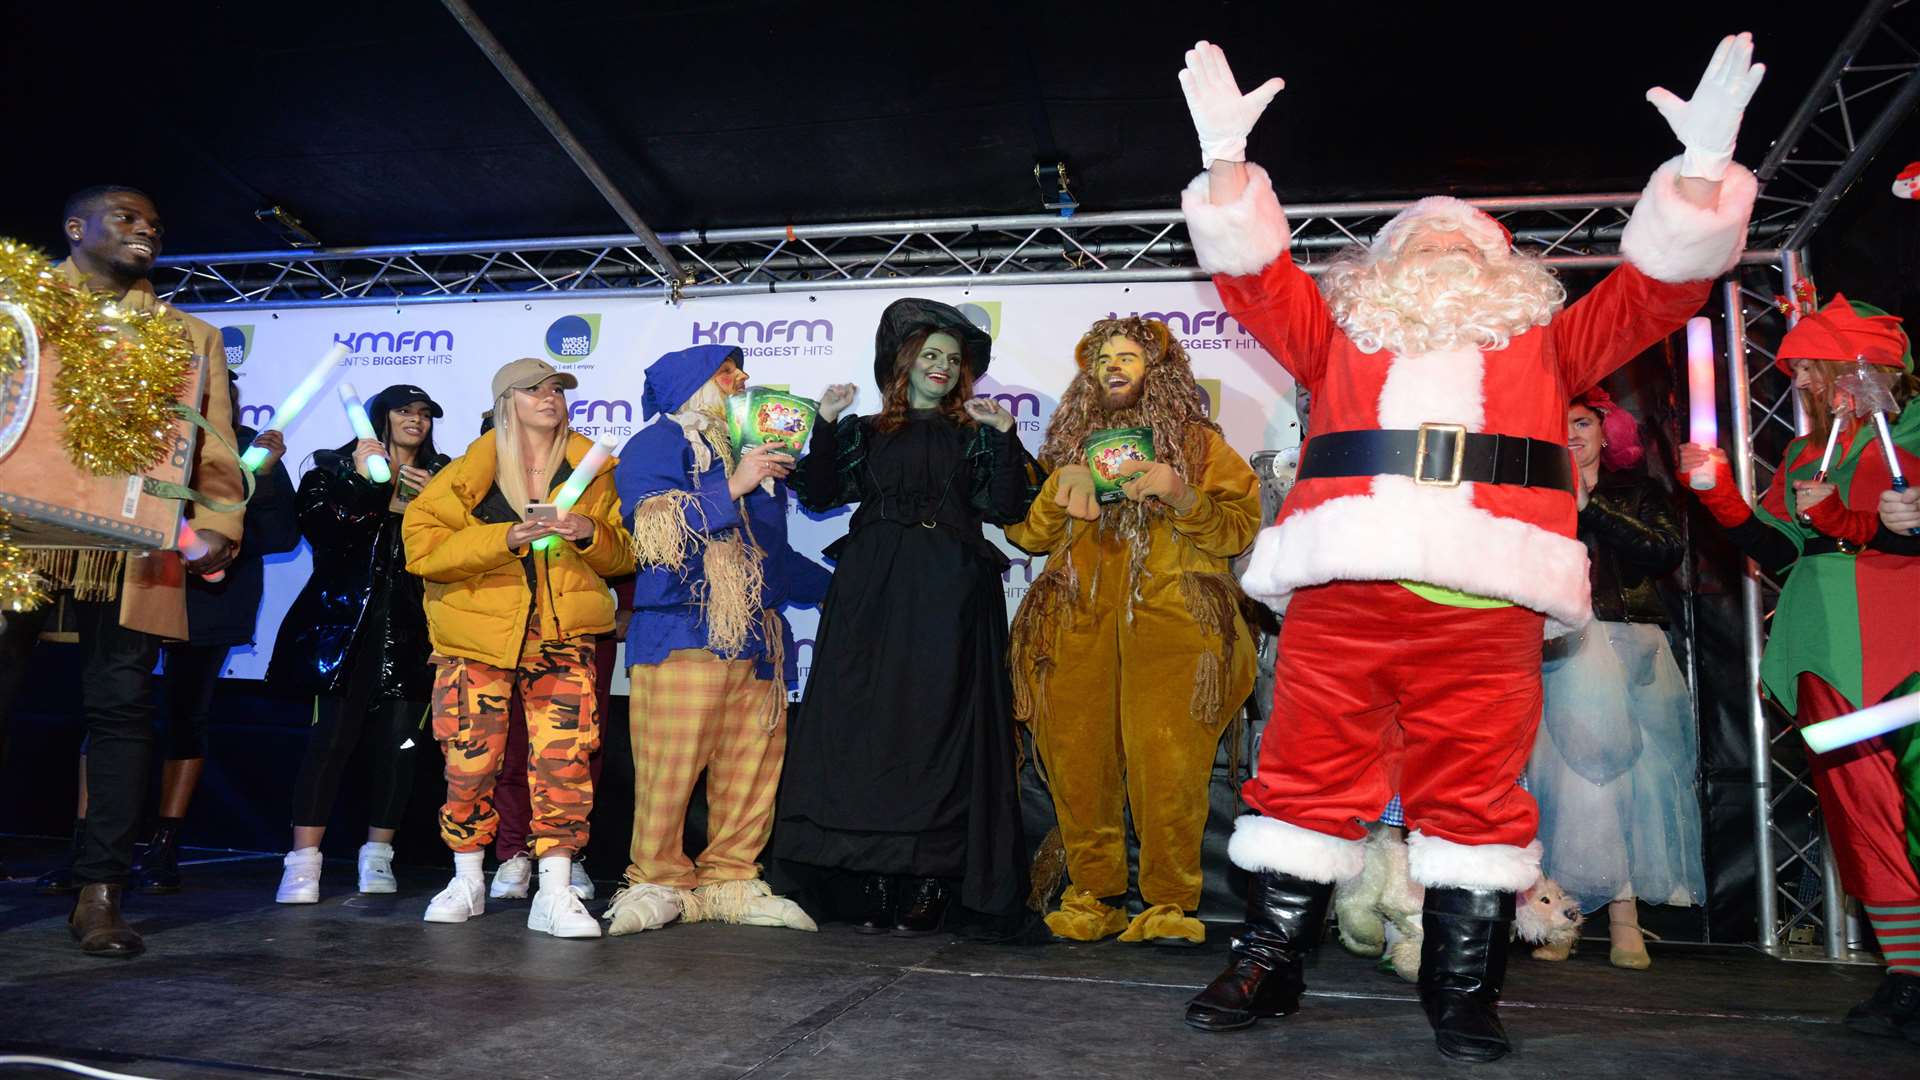 Father Christmas arrives on stage for the Westwood Cross Christmas lights switch-on